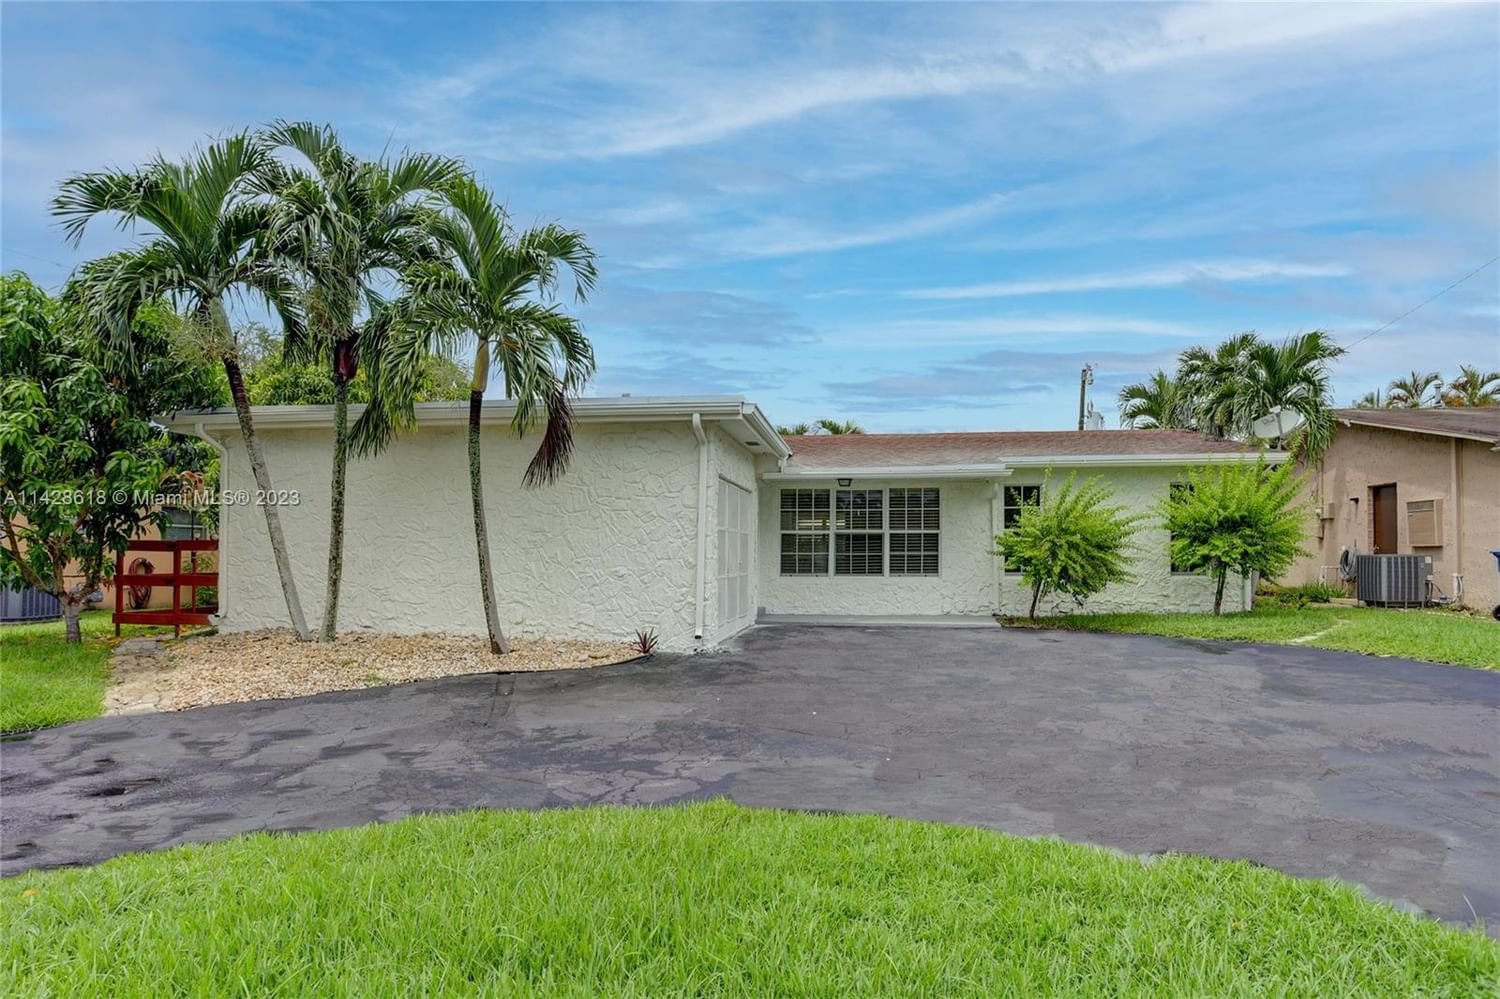 Real estate property located at 11461 30th St, Broward County, Sunrise, FL